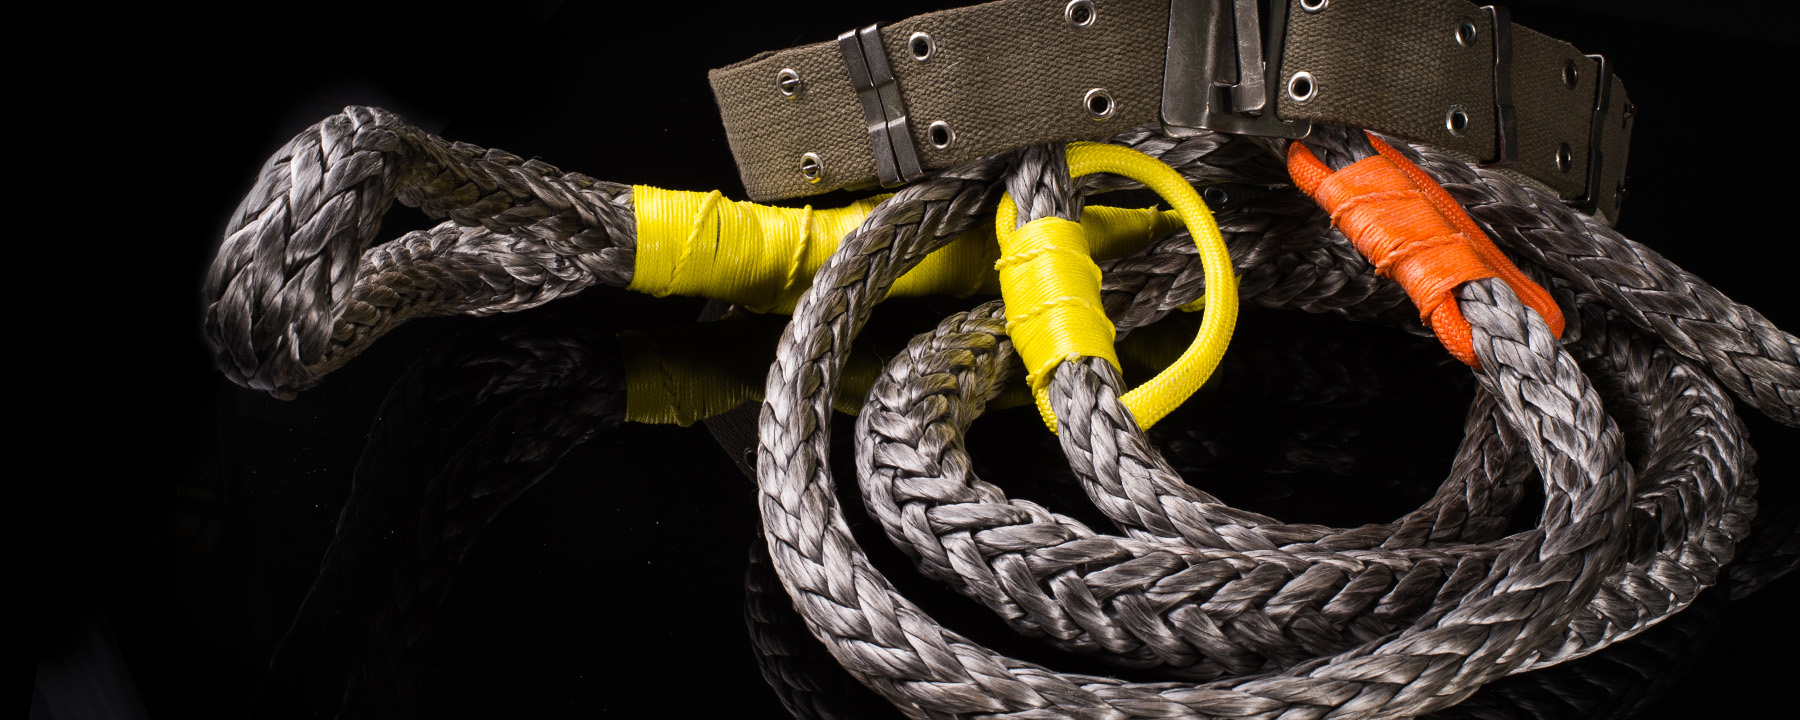 BLACK DYNAMIC - Cousin Trestec - Rope Manufacturer for Industry and Sports